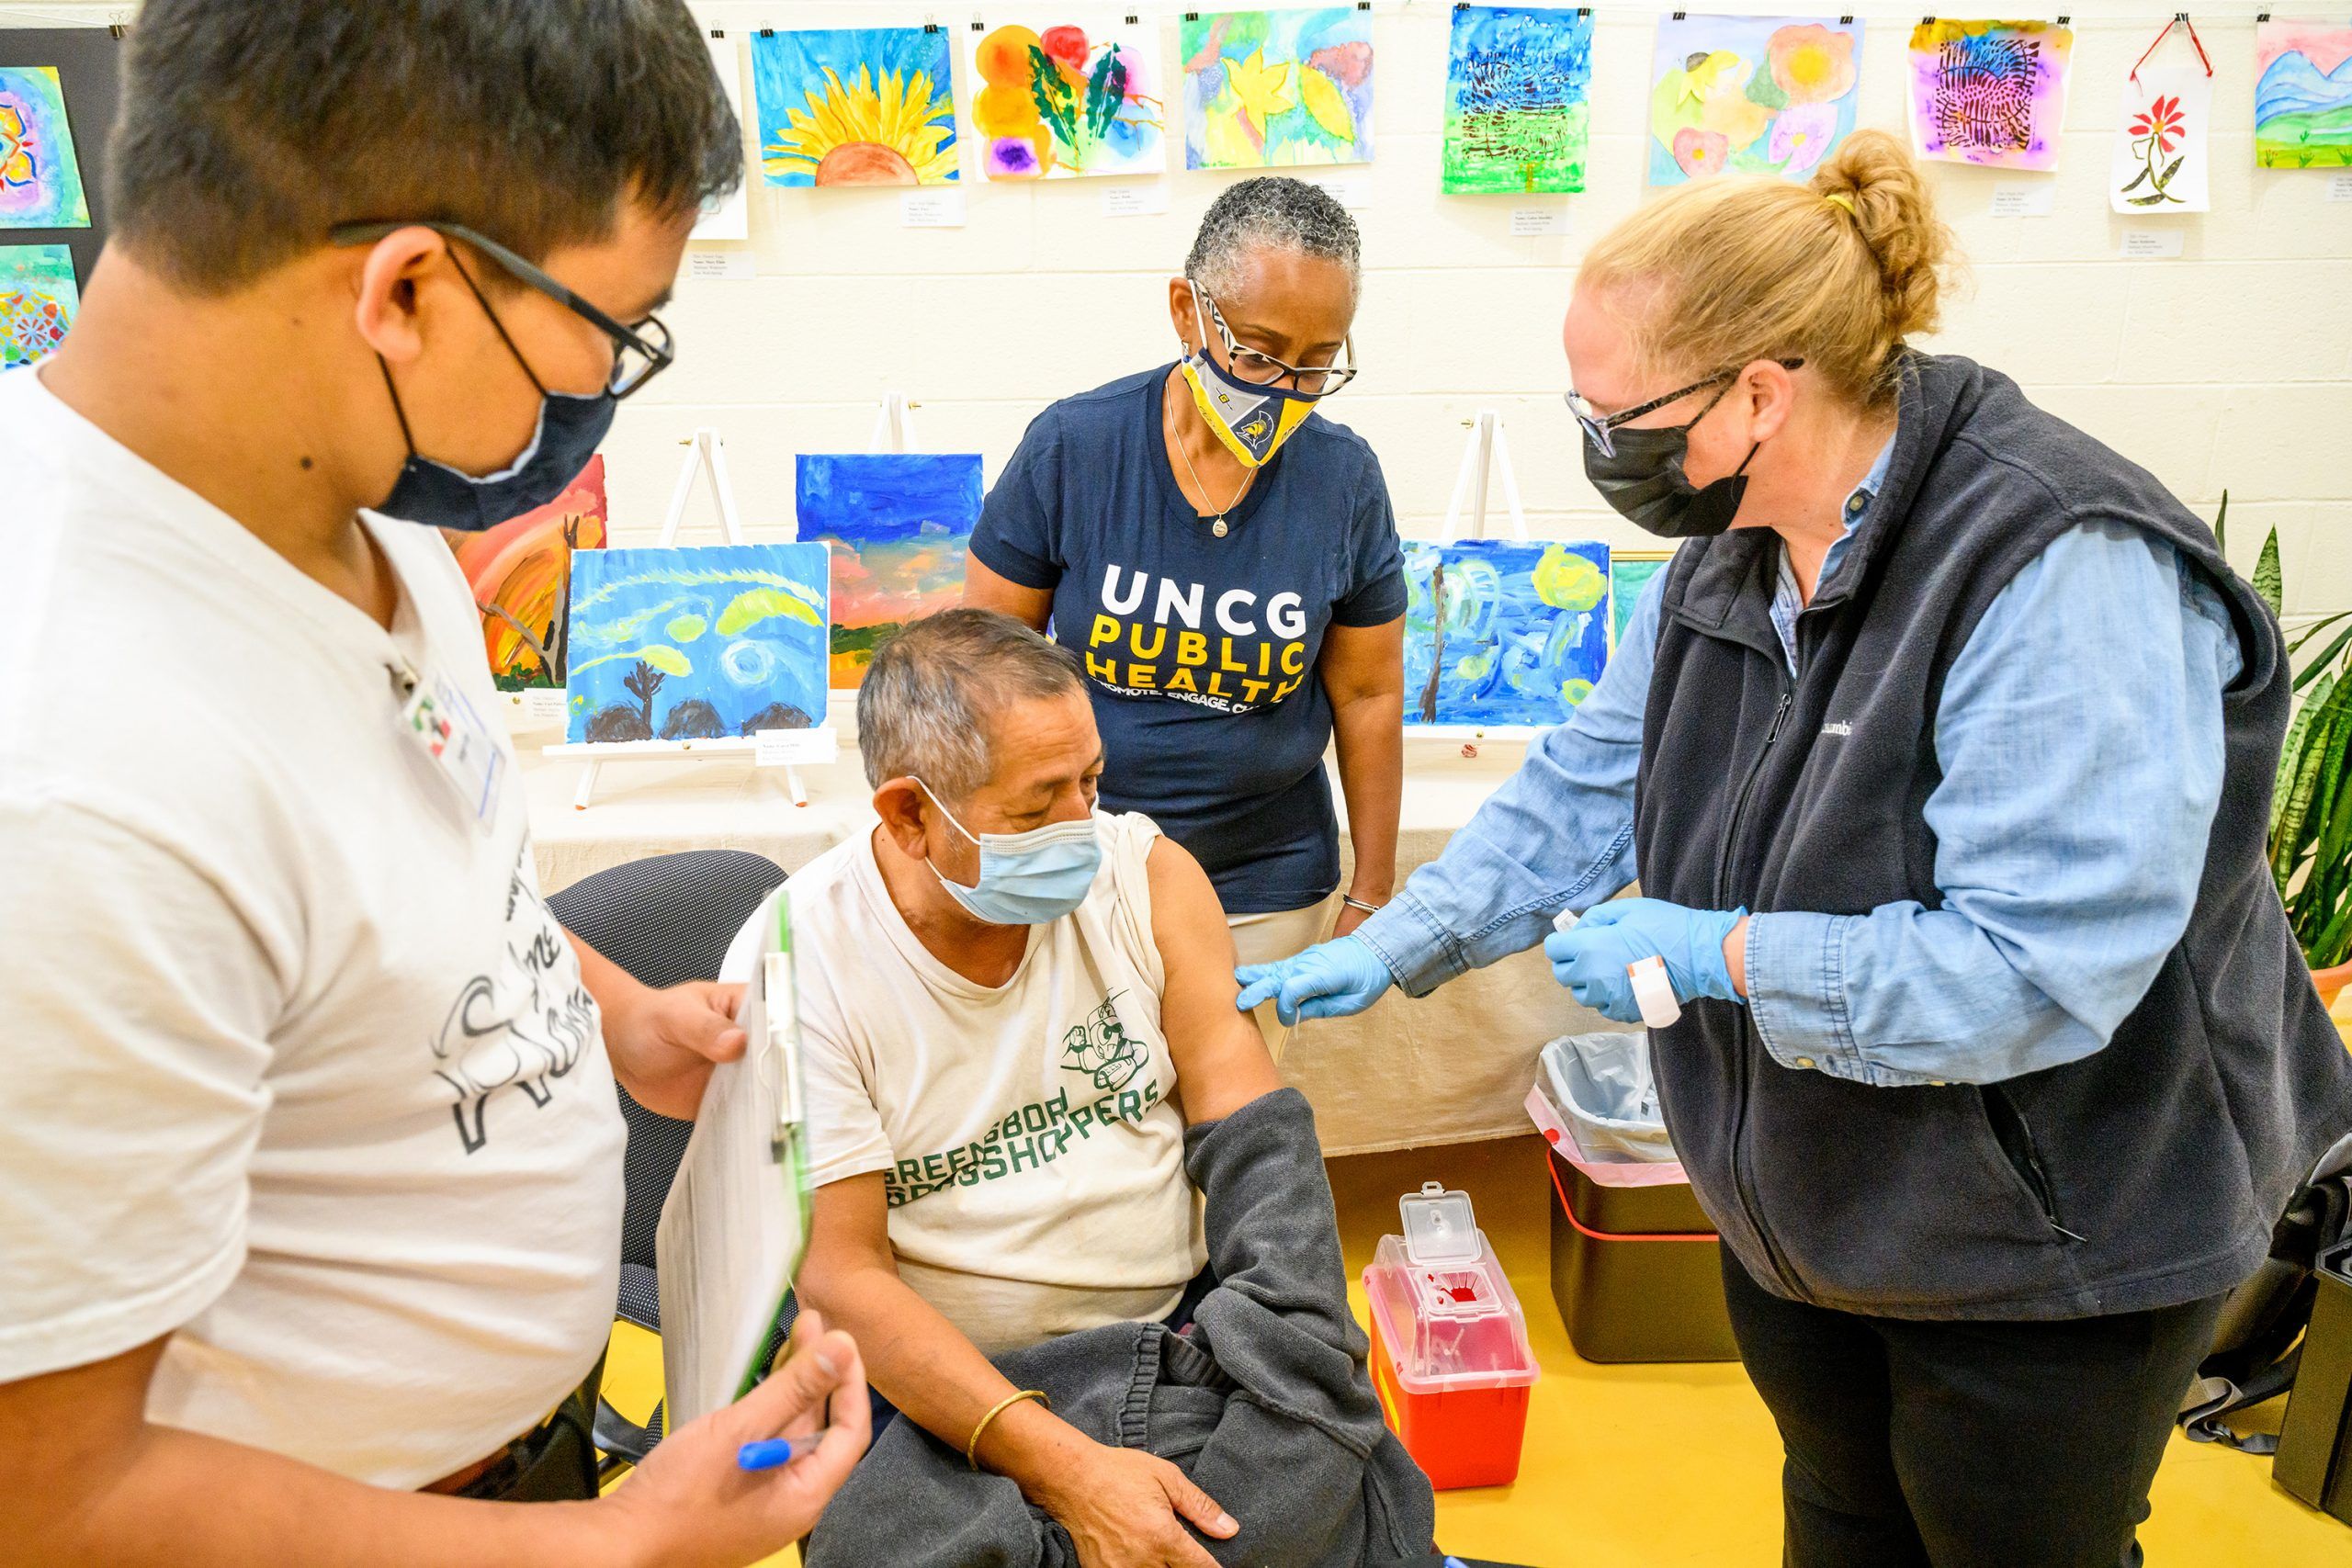 Dr. Morrison and Siu assist at a vaccine clinic, standing by as a man receives a dose of vaccine from a nurse.